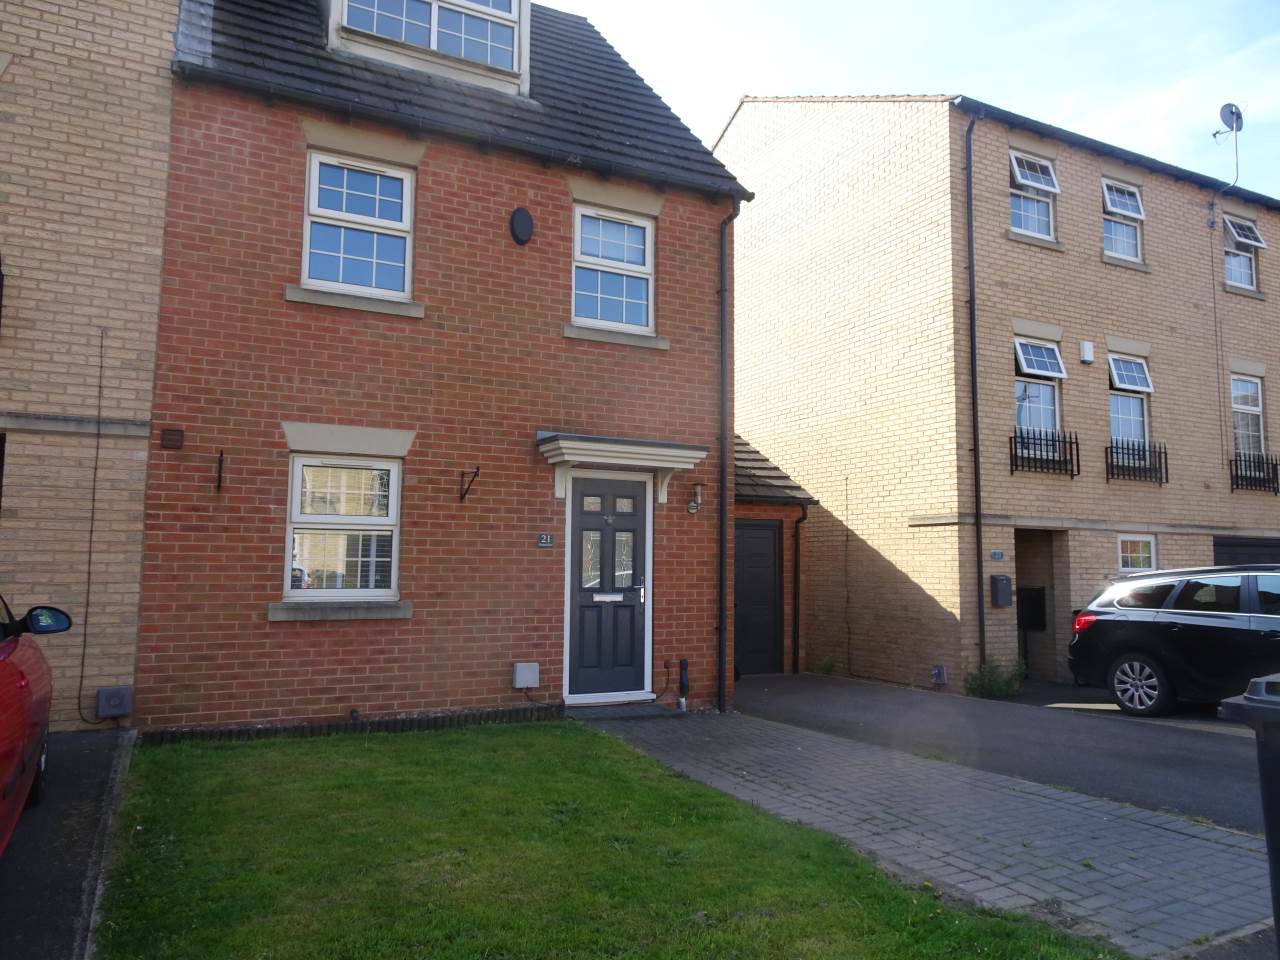 3 bed House (unspecified) for rent in Brierley. From C and I Lettings - Barnsley